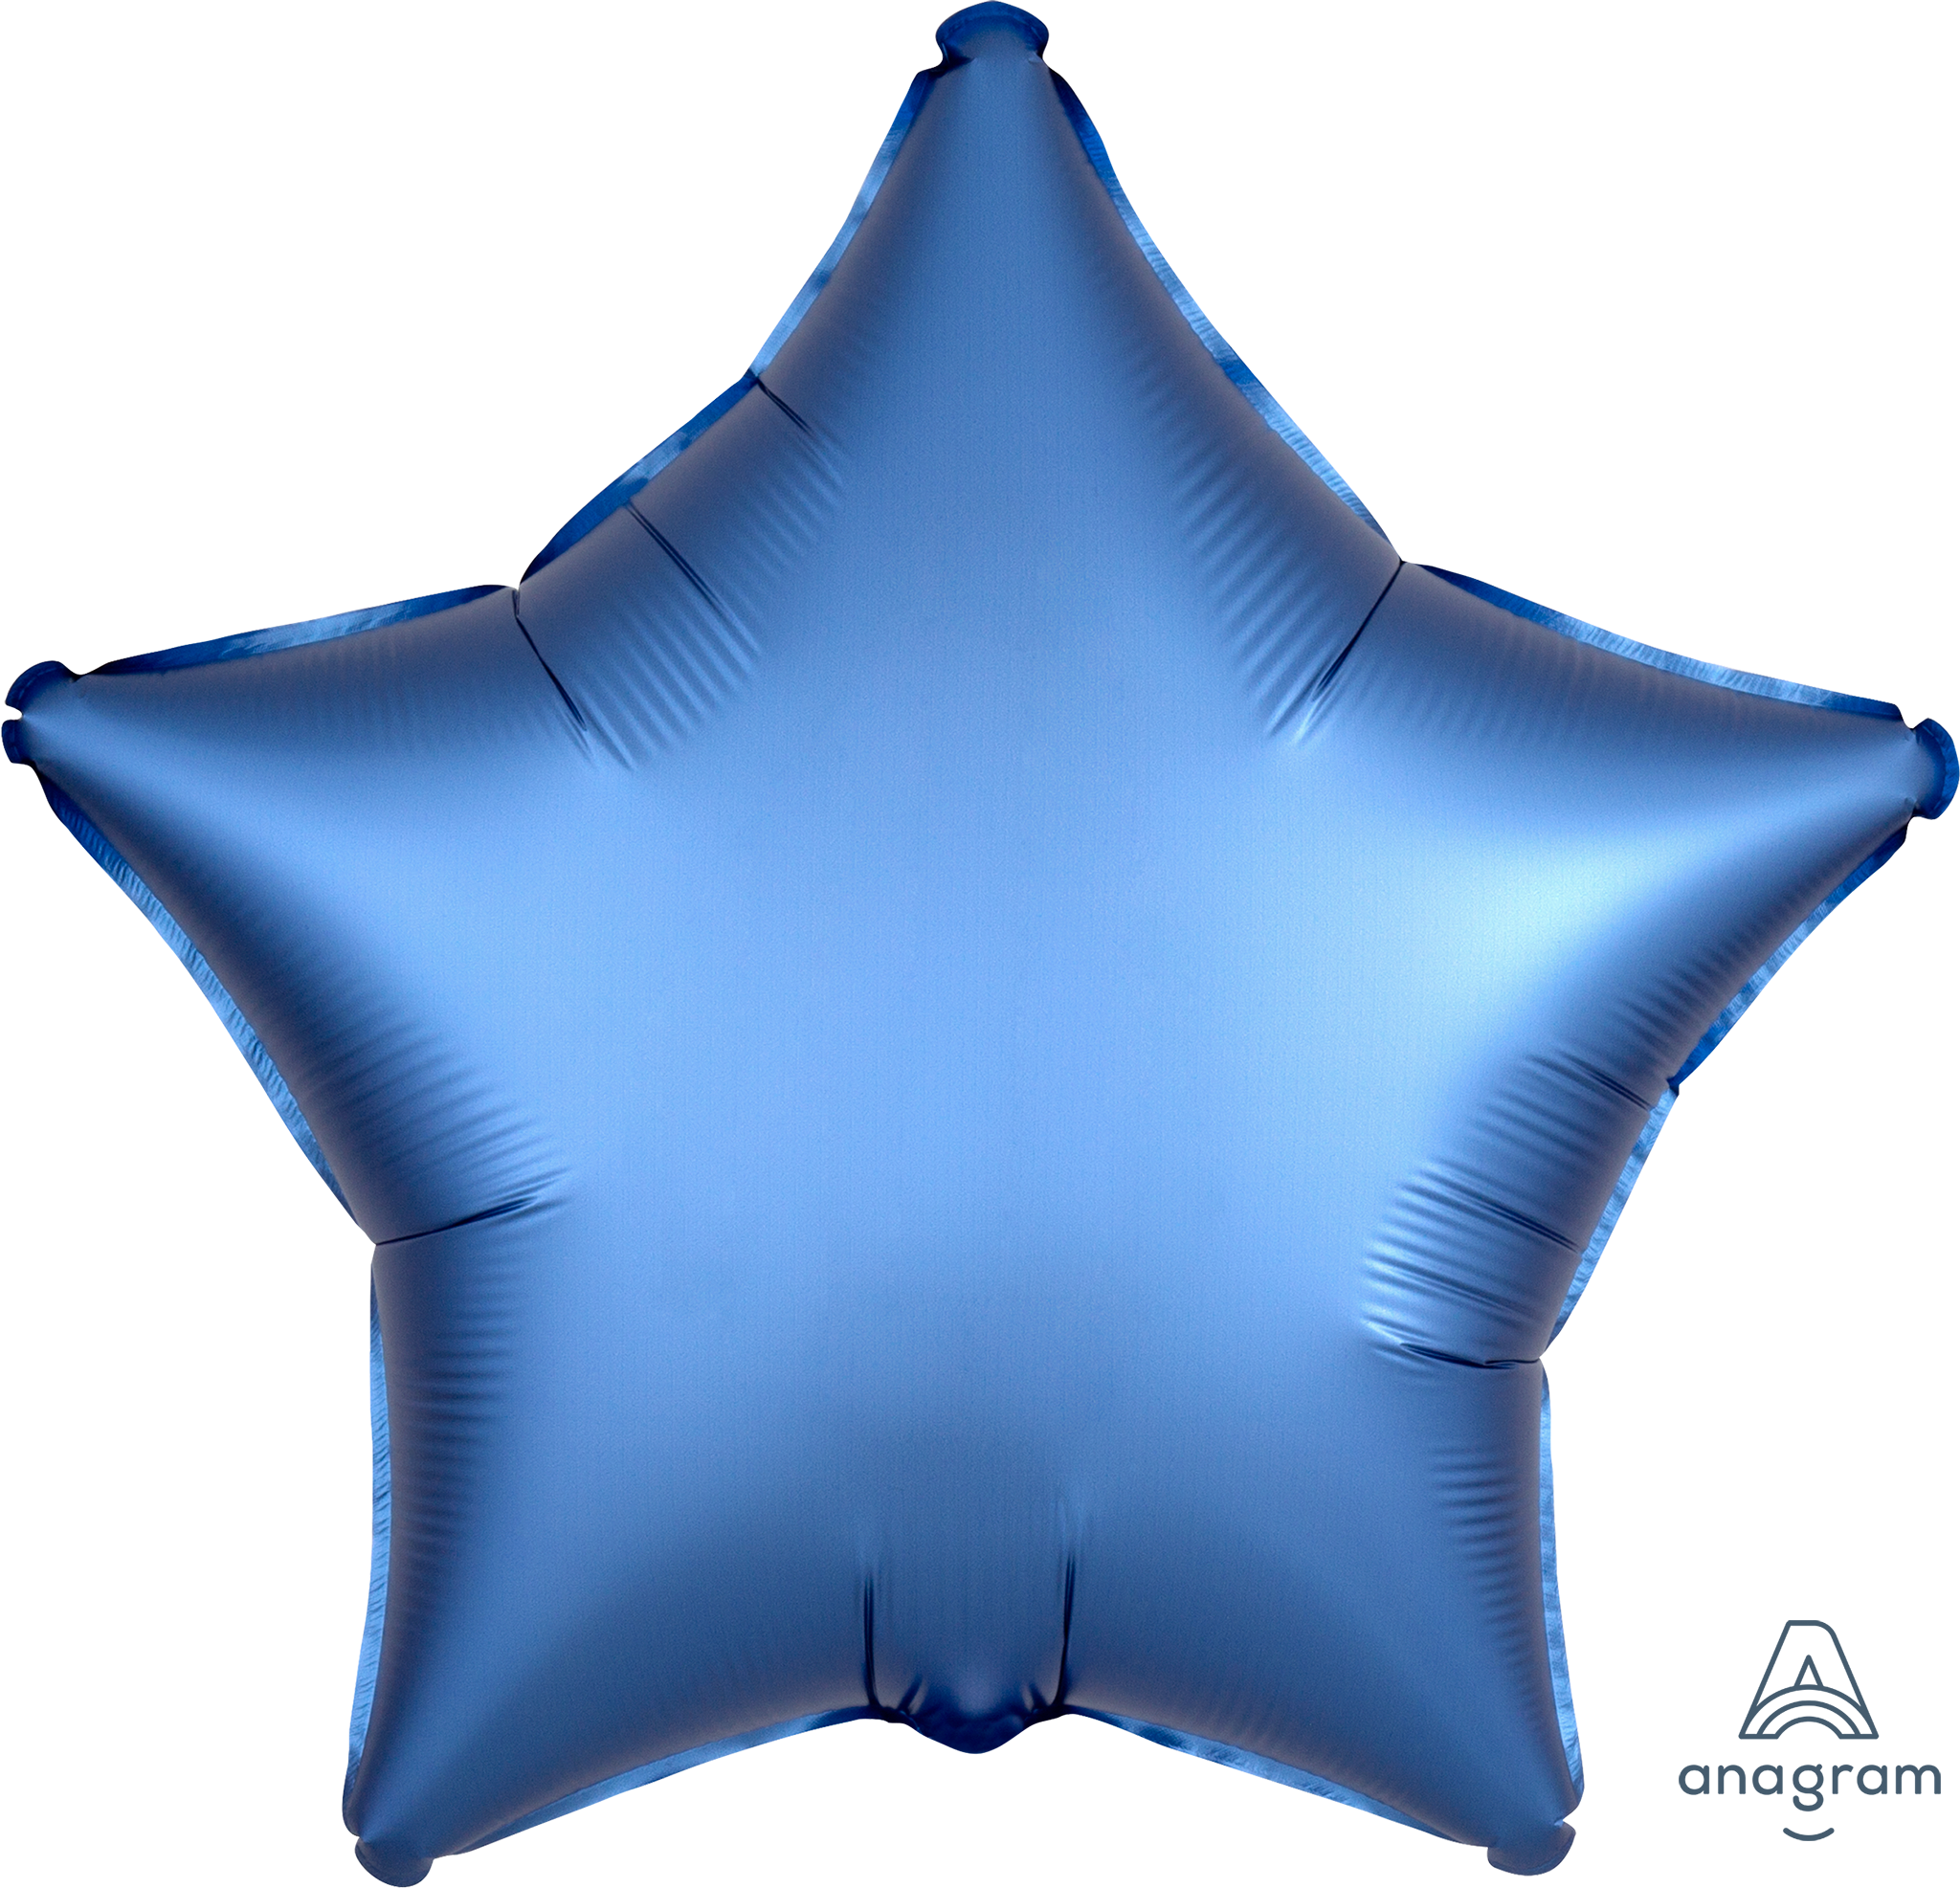 18"-solid-satin-luxe-azure-blue-star-balloon-unicorn-party-decorations-graduation-party